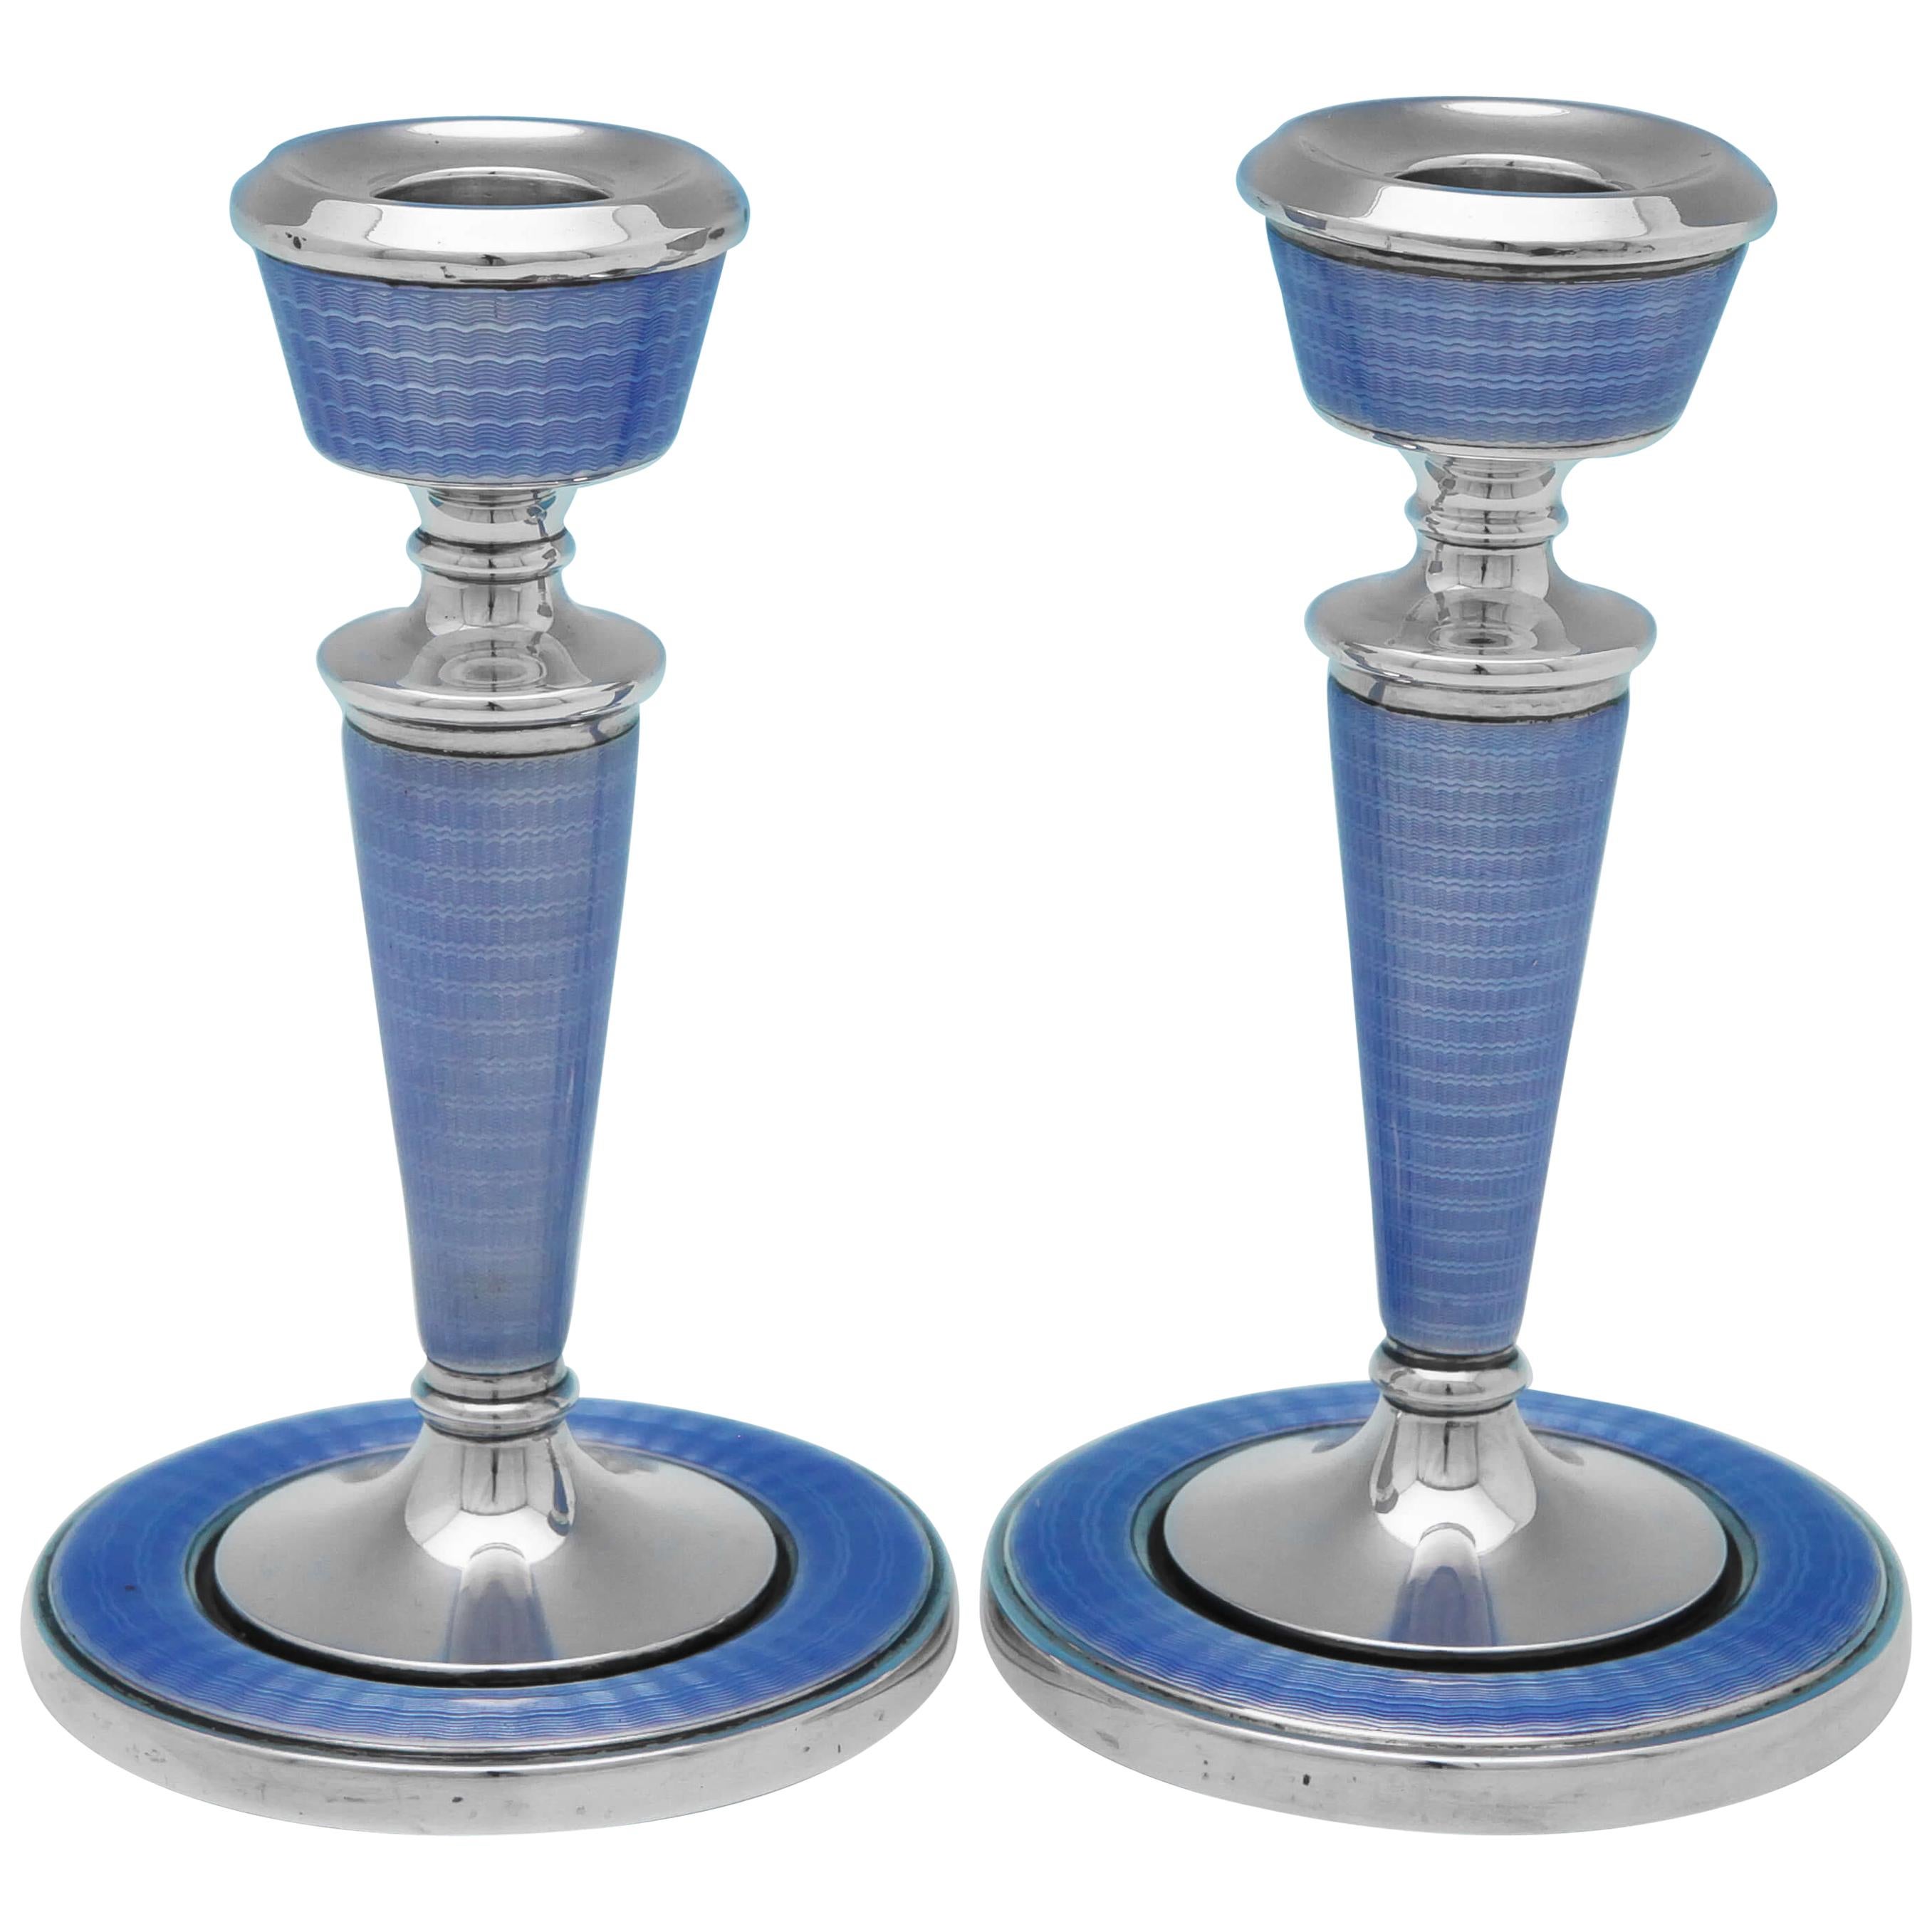 Art Deco Period Enamelled Sterling Silver Candlesticks from 1929 by A.L Dennison